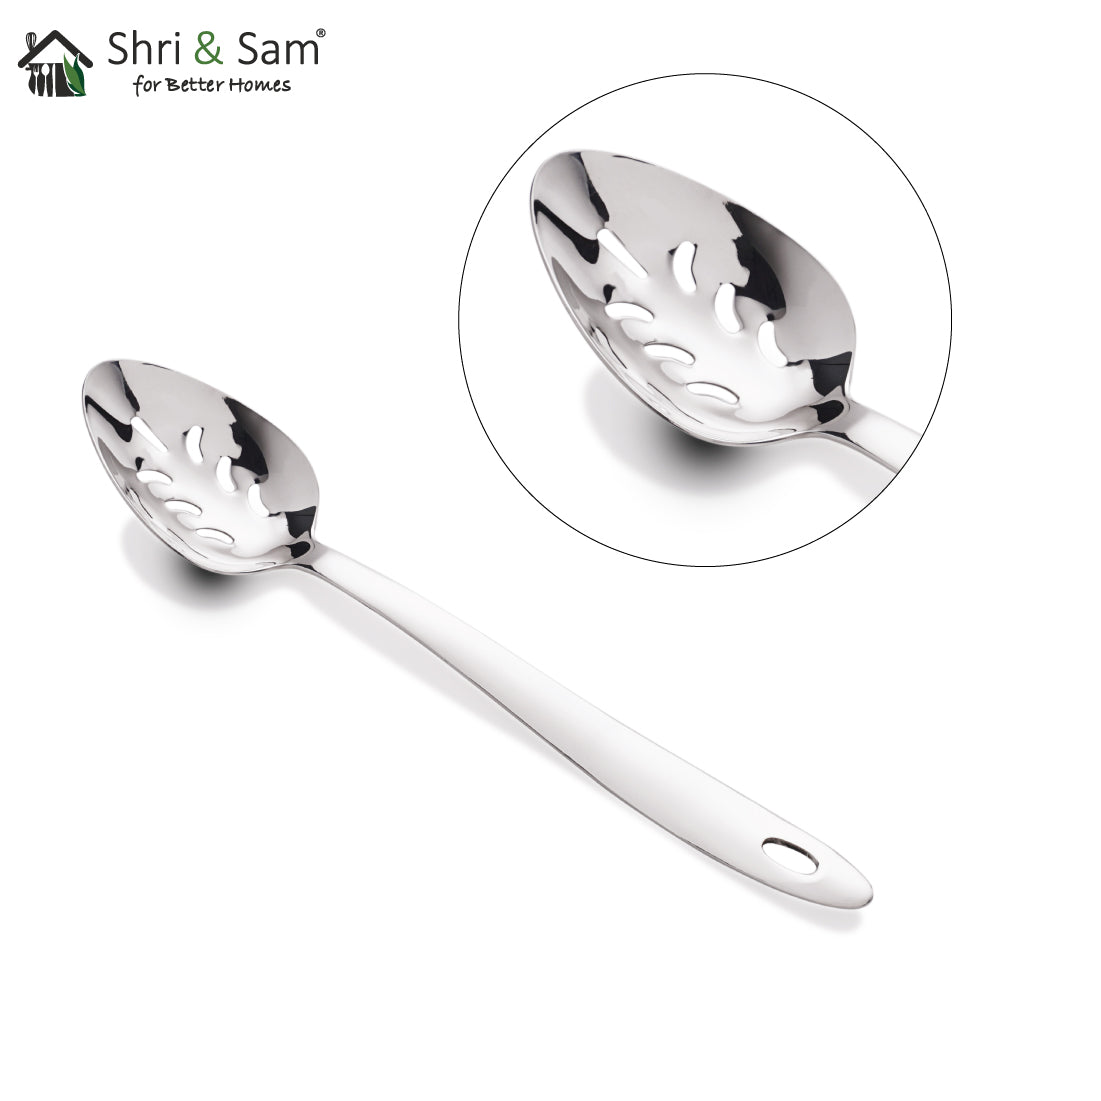 Stainless Steel Basting Spoon Slotted Onida